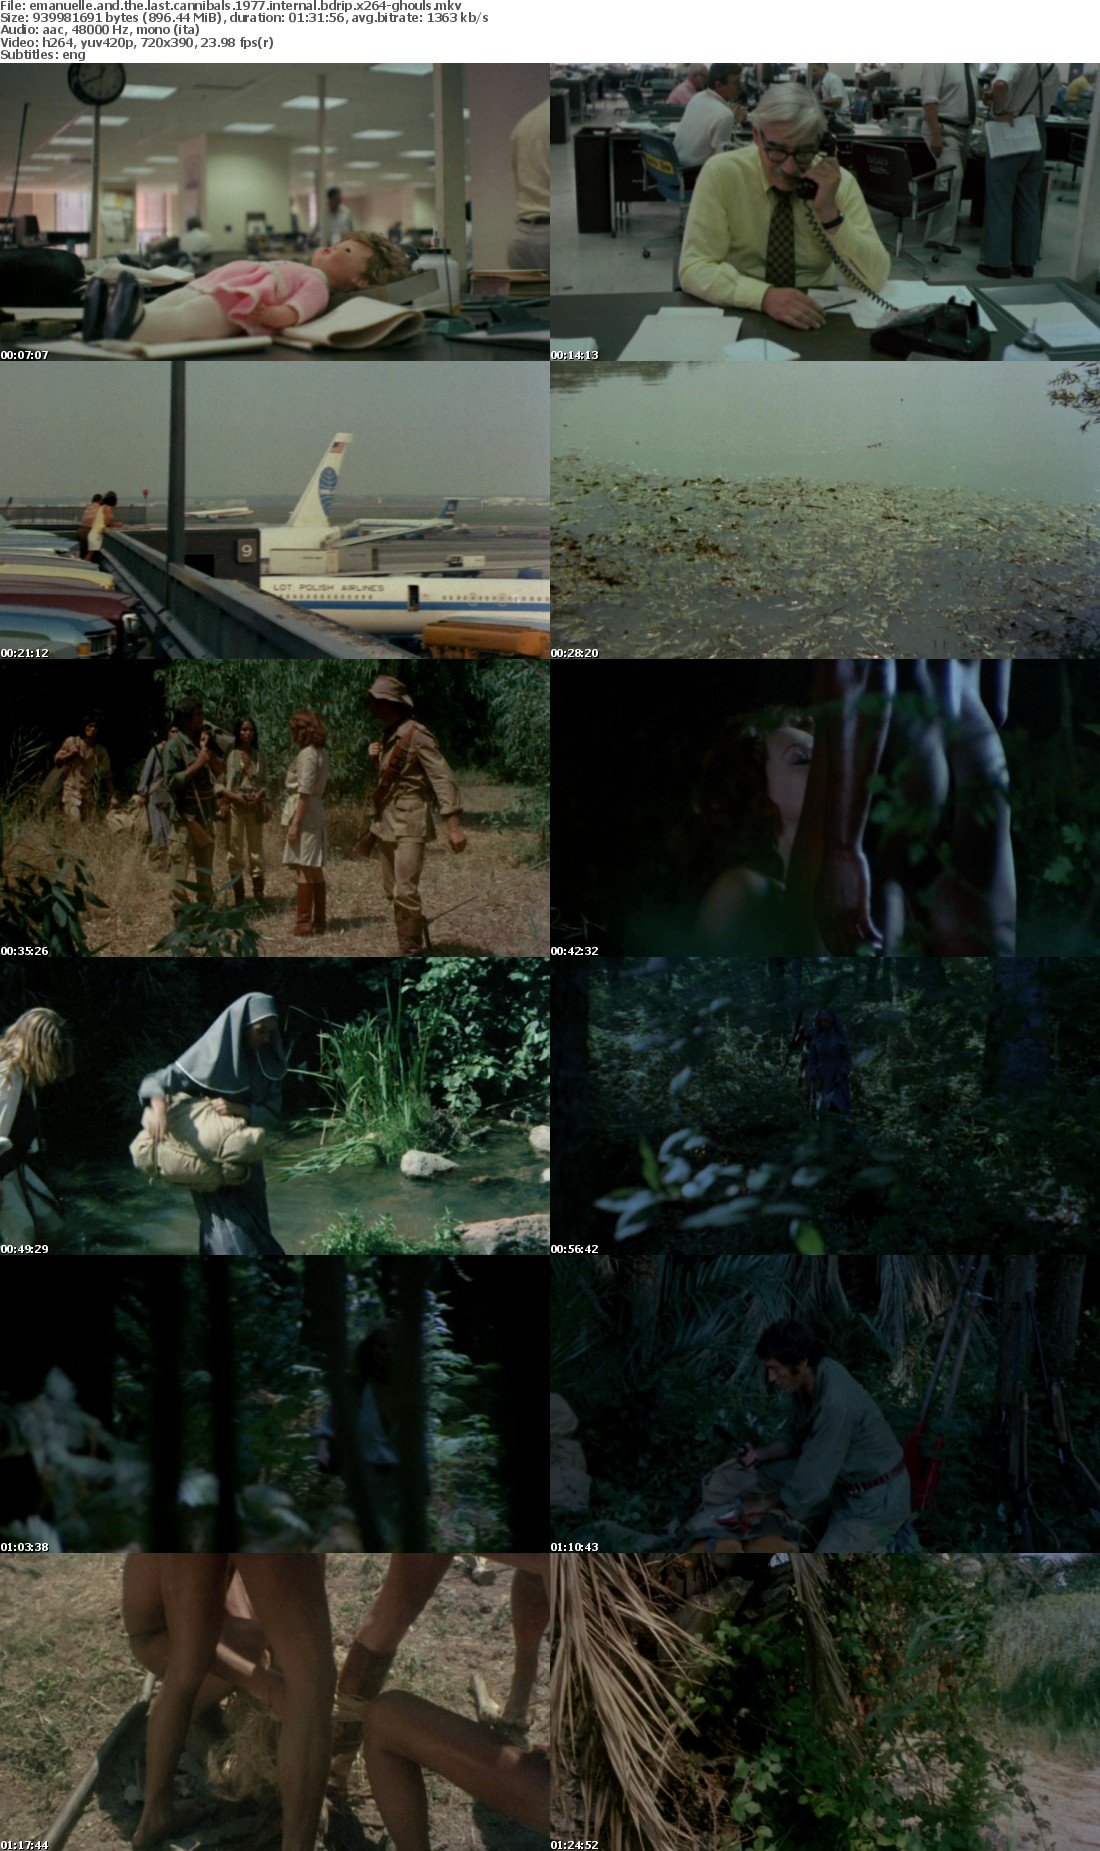 Emanuelle And The Last Cannibals 1977 INTERNAL BDRip x264-GHOULS.